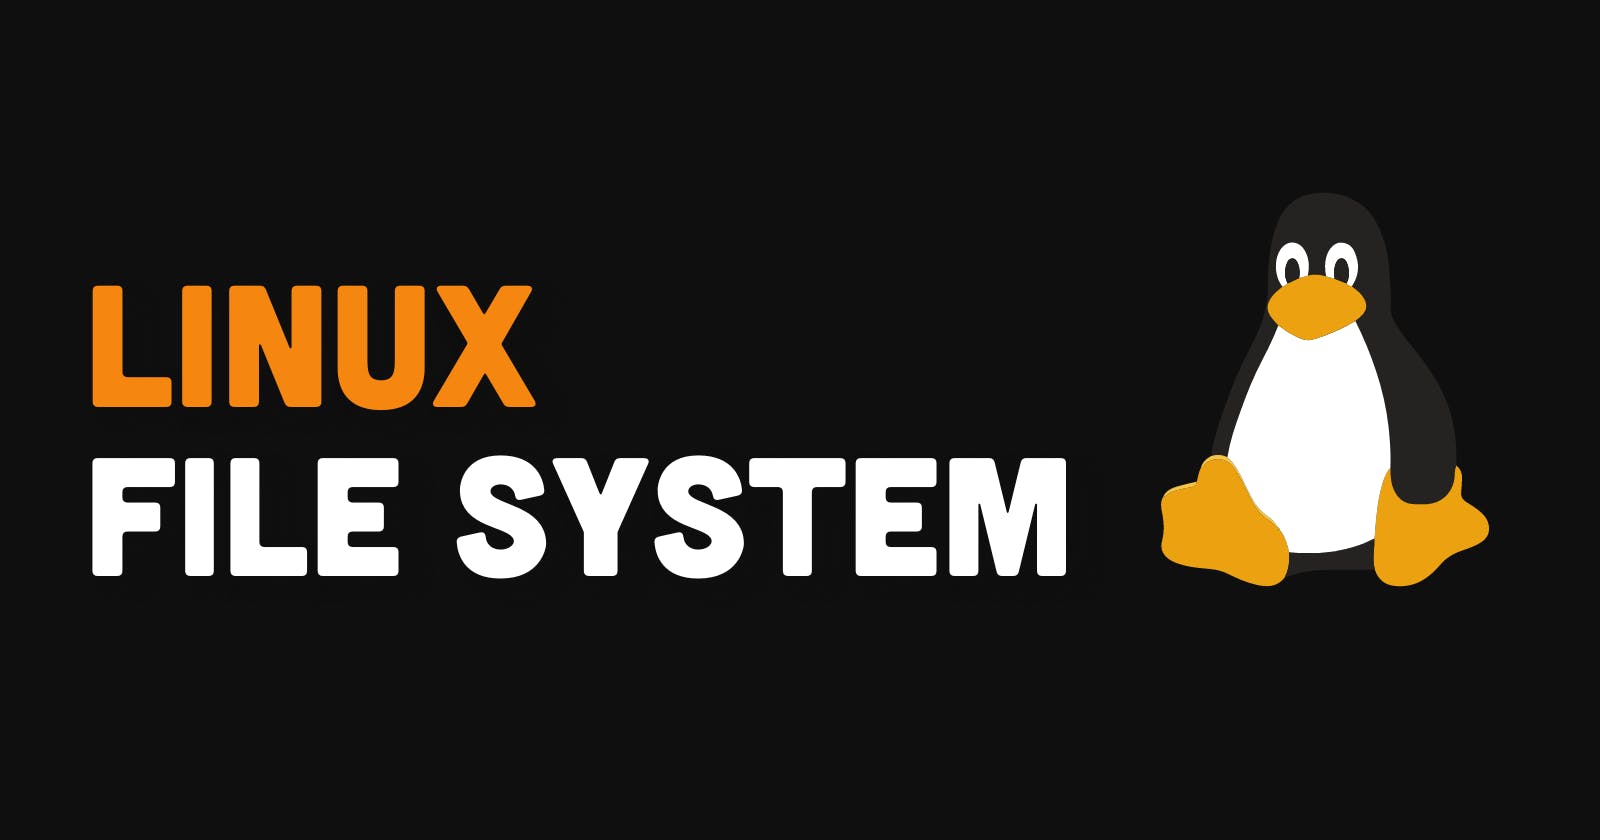 Linux File System (something new in short)